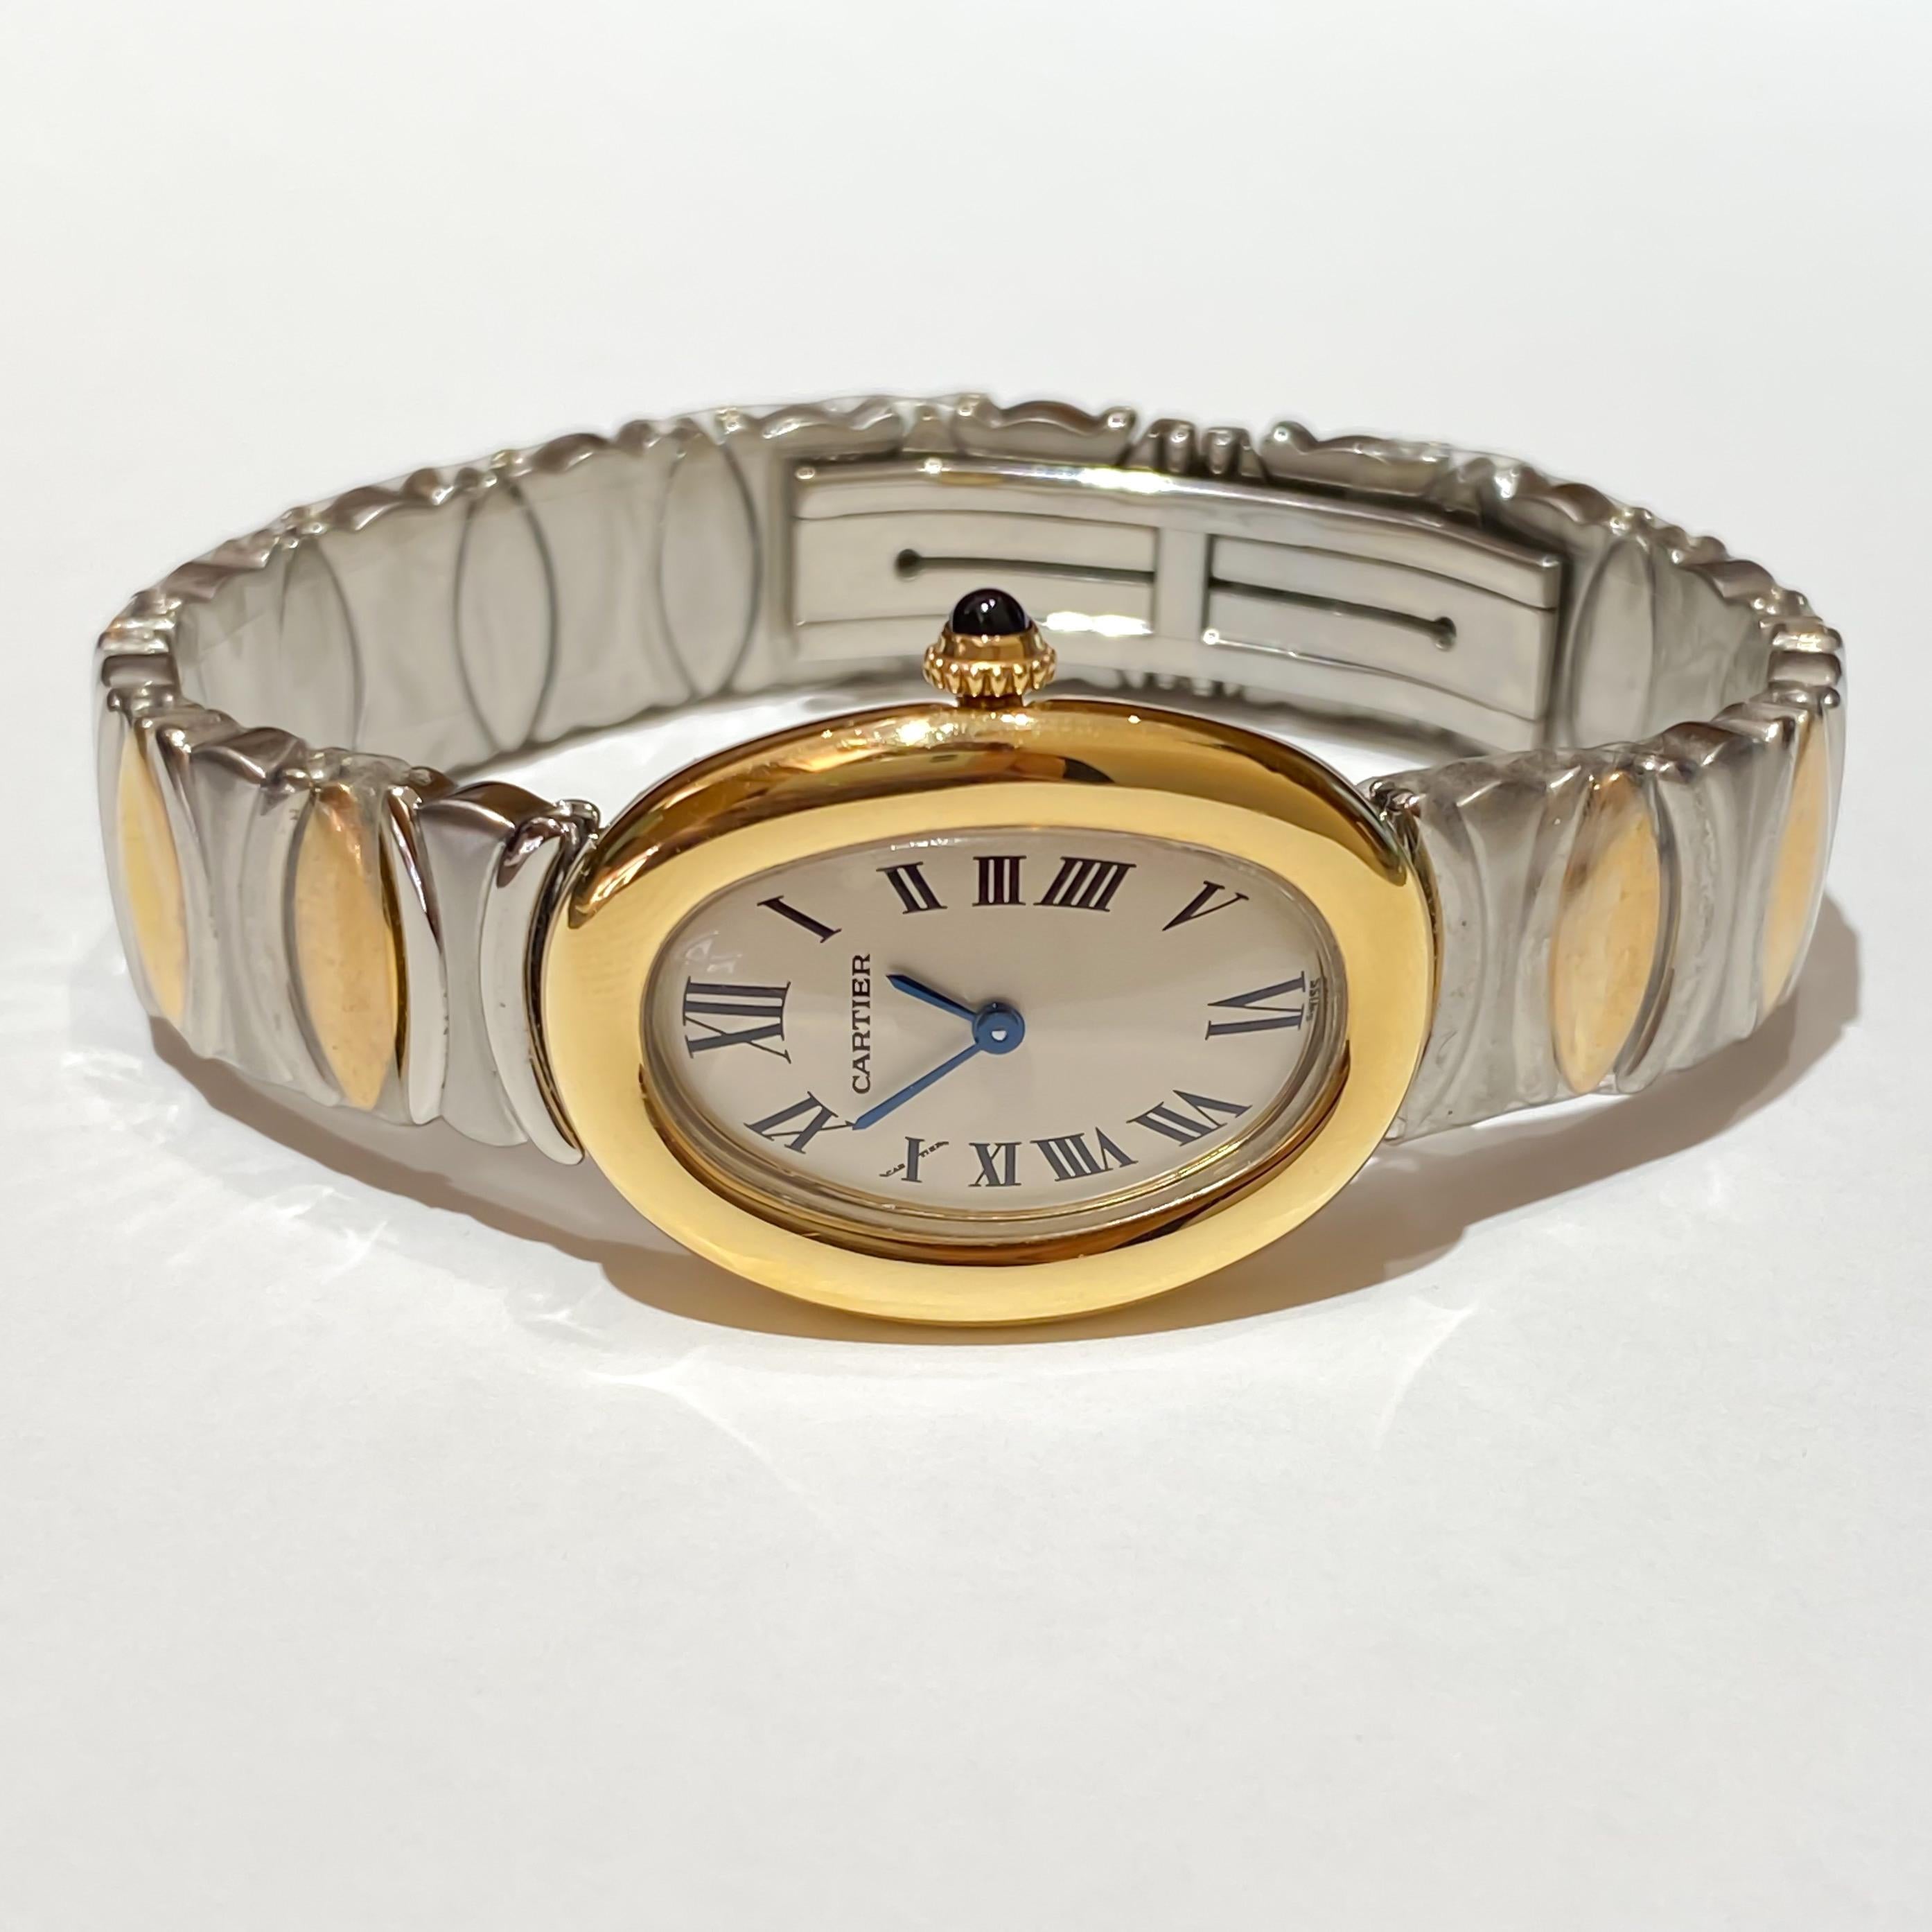 Cartier Ladies Rare Baignoire 18 Karat Gold and Steel Quartz Watch W15045D8 In Excellent Condition In Carmel-by-the-Sea, CA